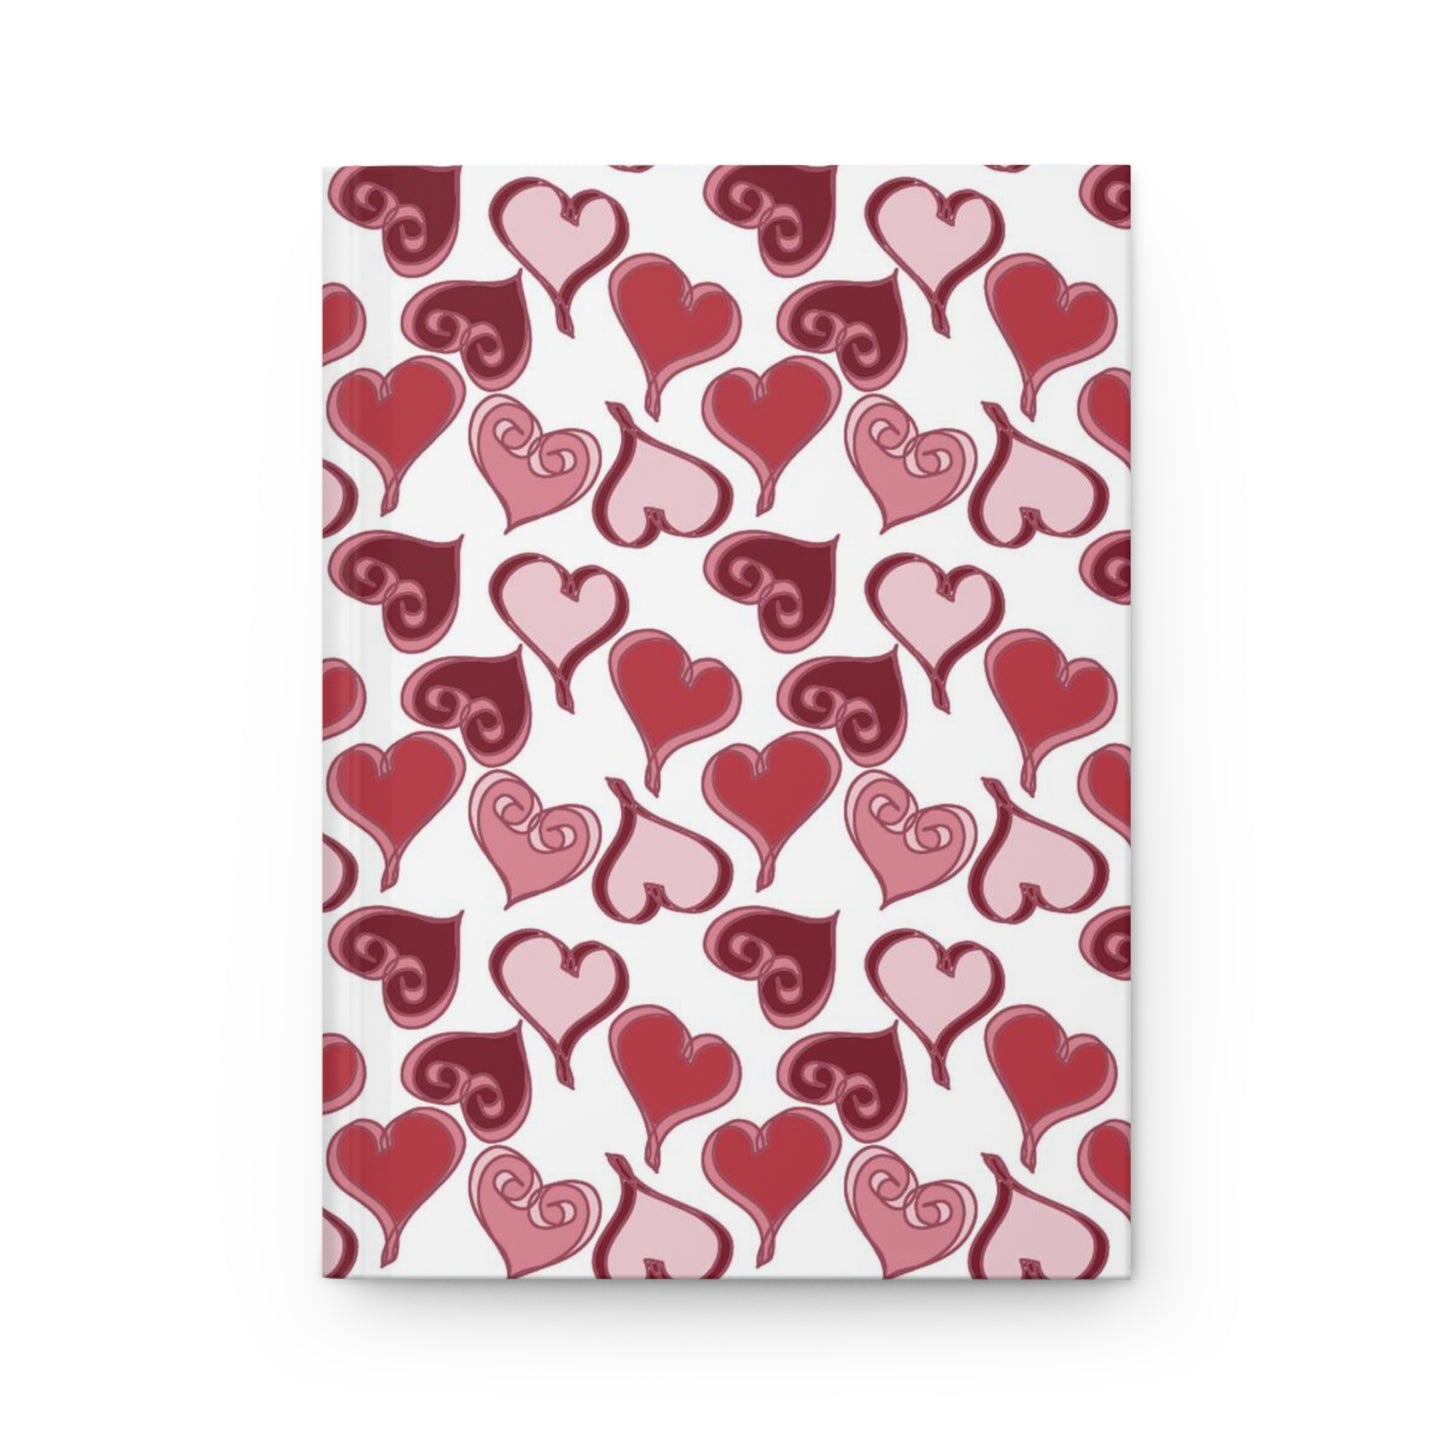 Beautiful Hearts - Pink, Red, and White - Hardcover Lined Journal Matte